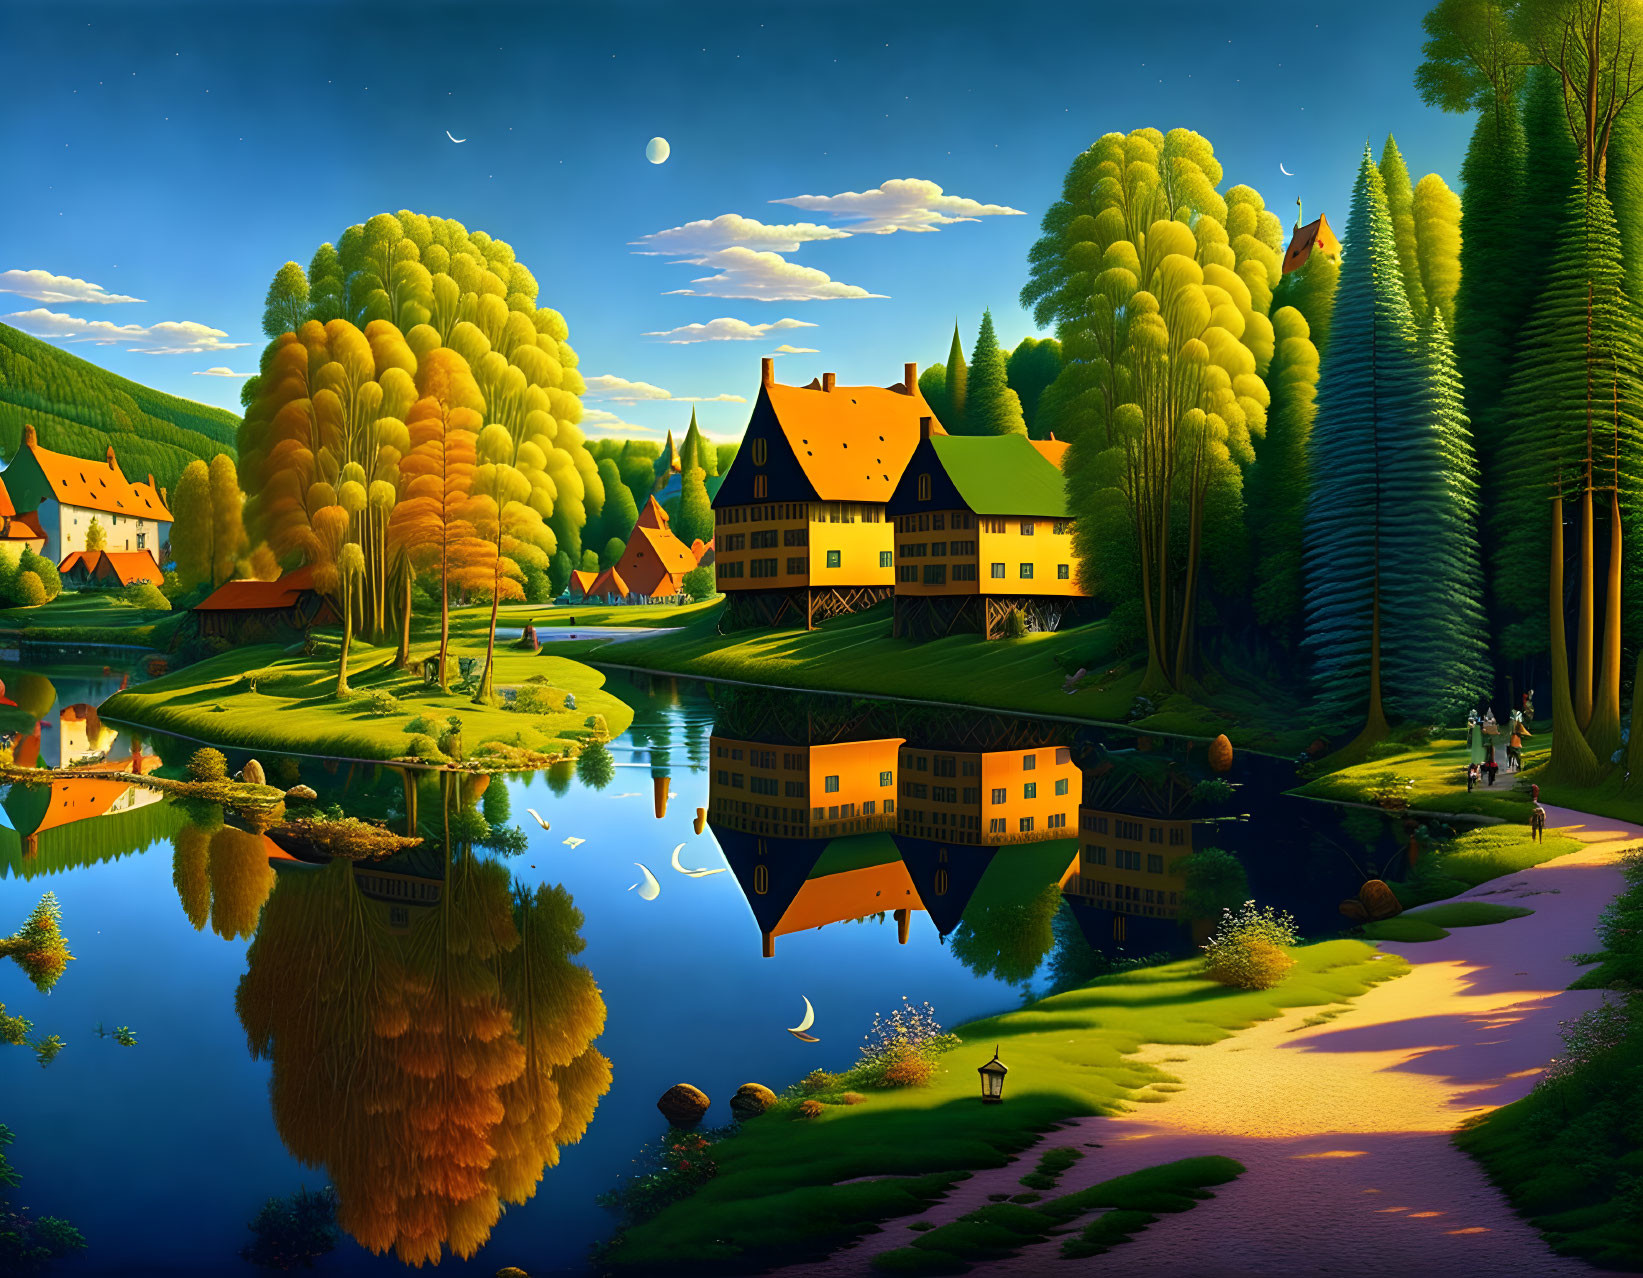 Idyllic landscape with reflective lake, traditional houses, lush trees, clear sky, and people.